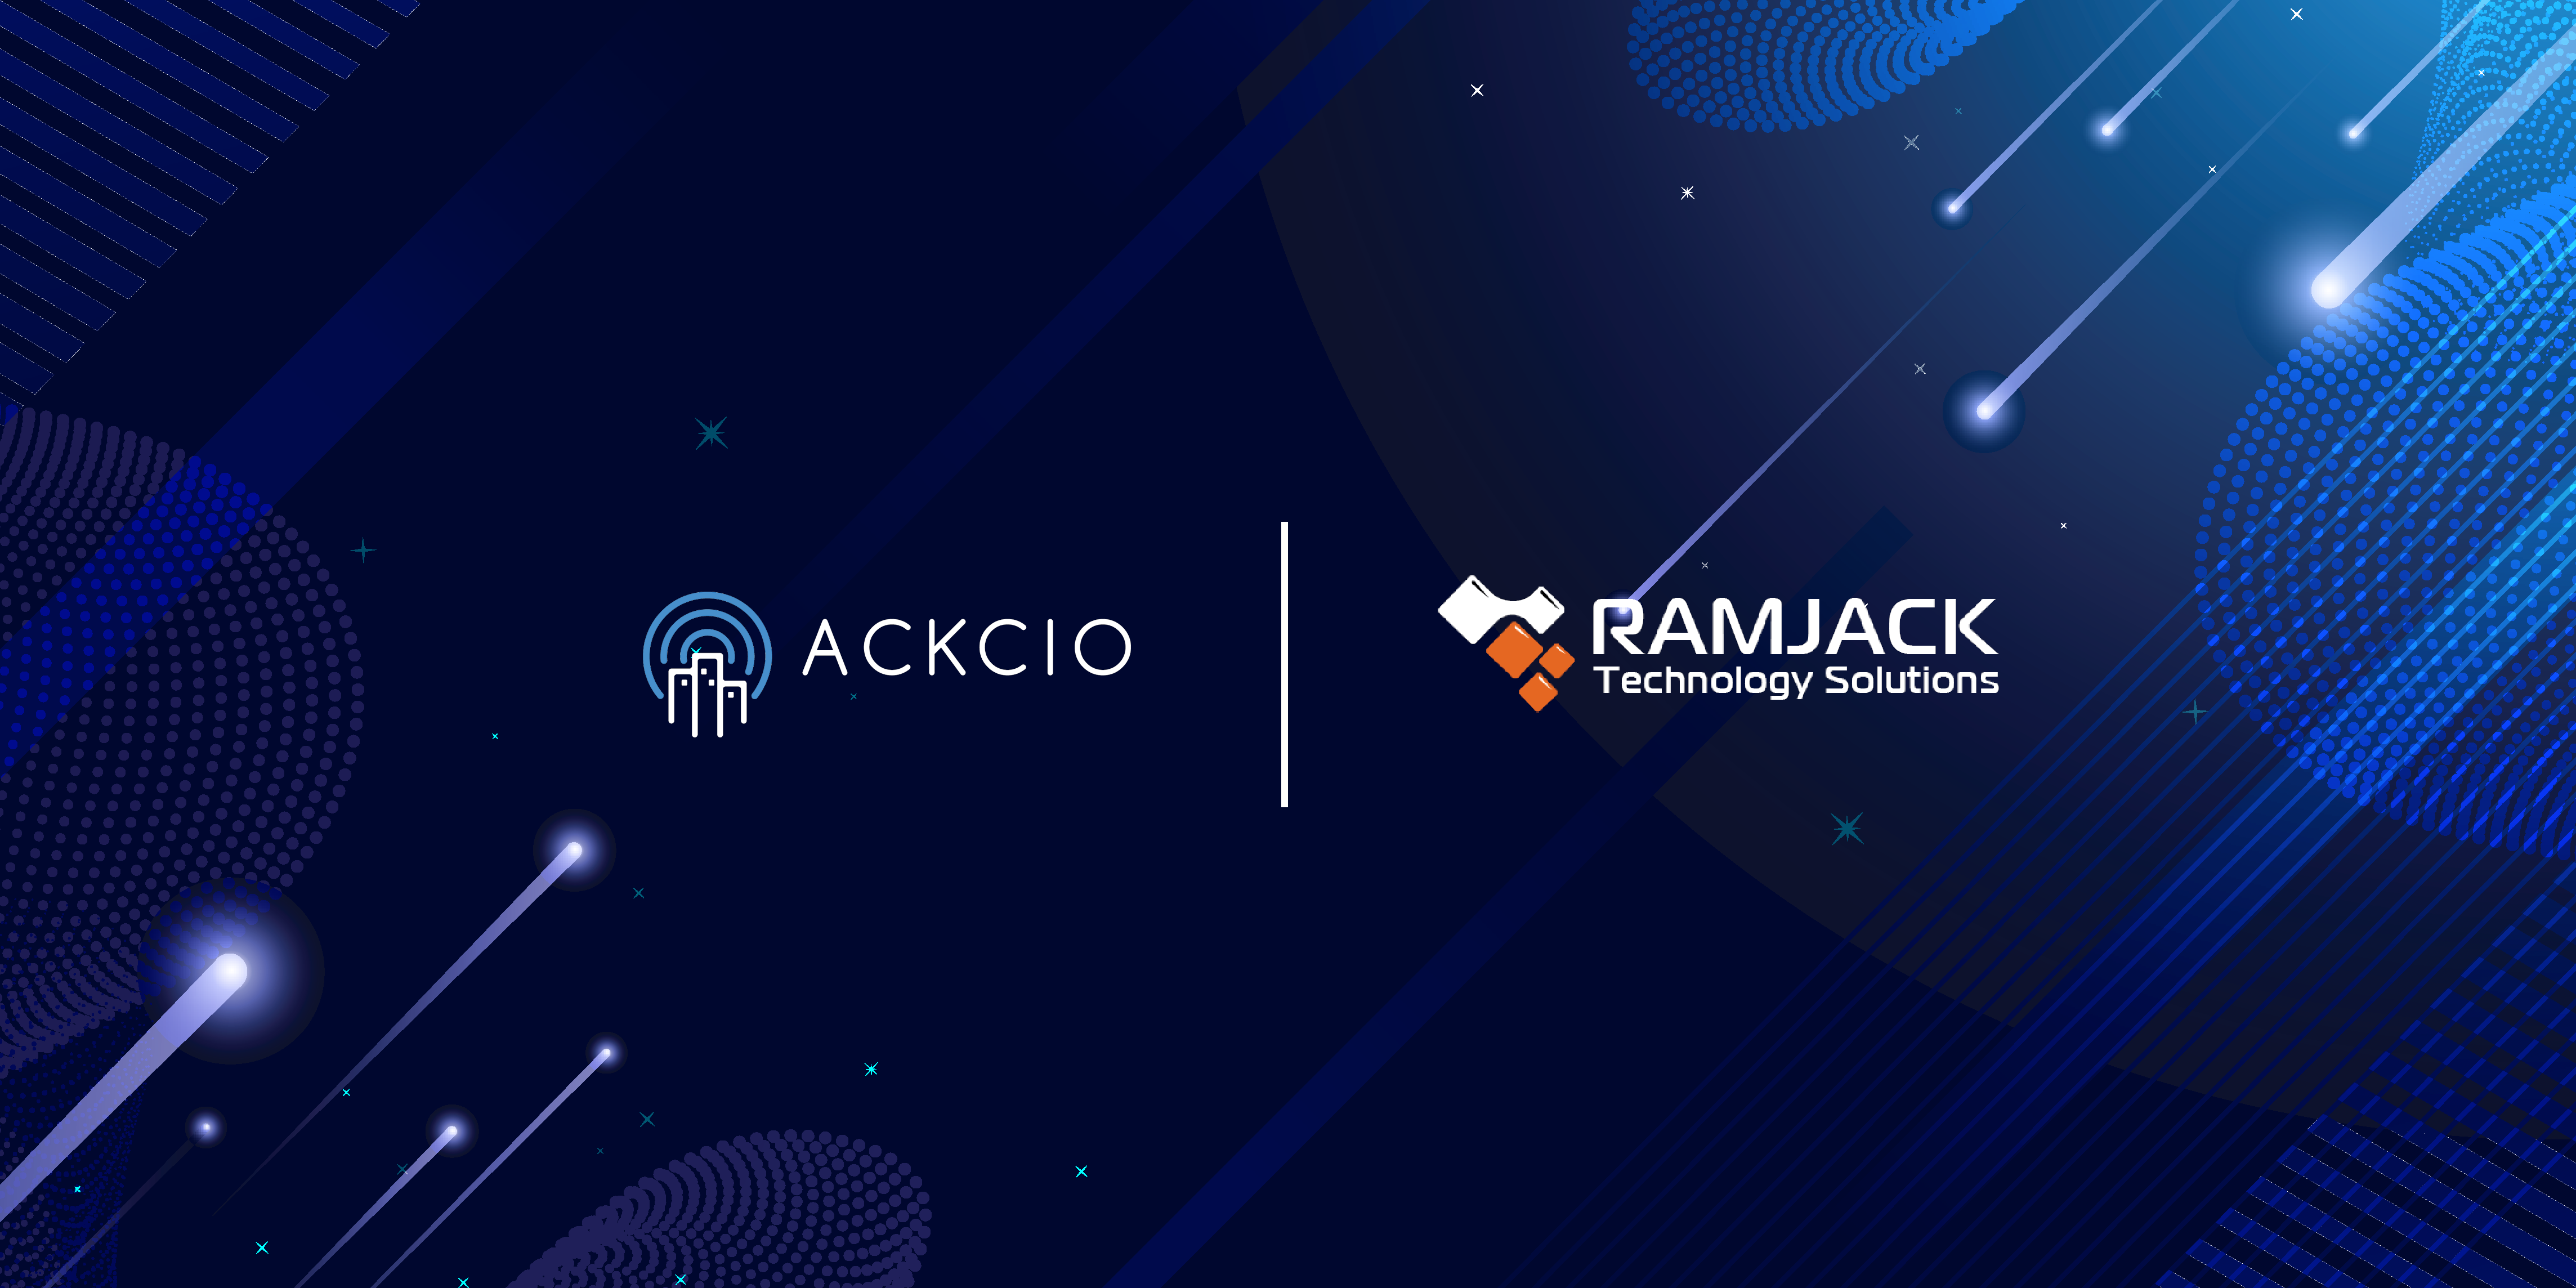 Partners With Ramjack Technology Solutions